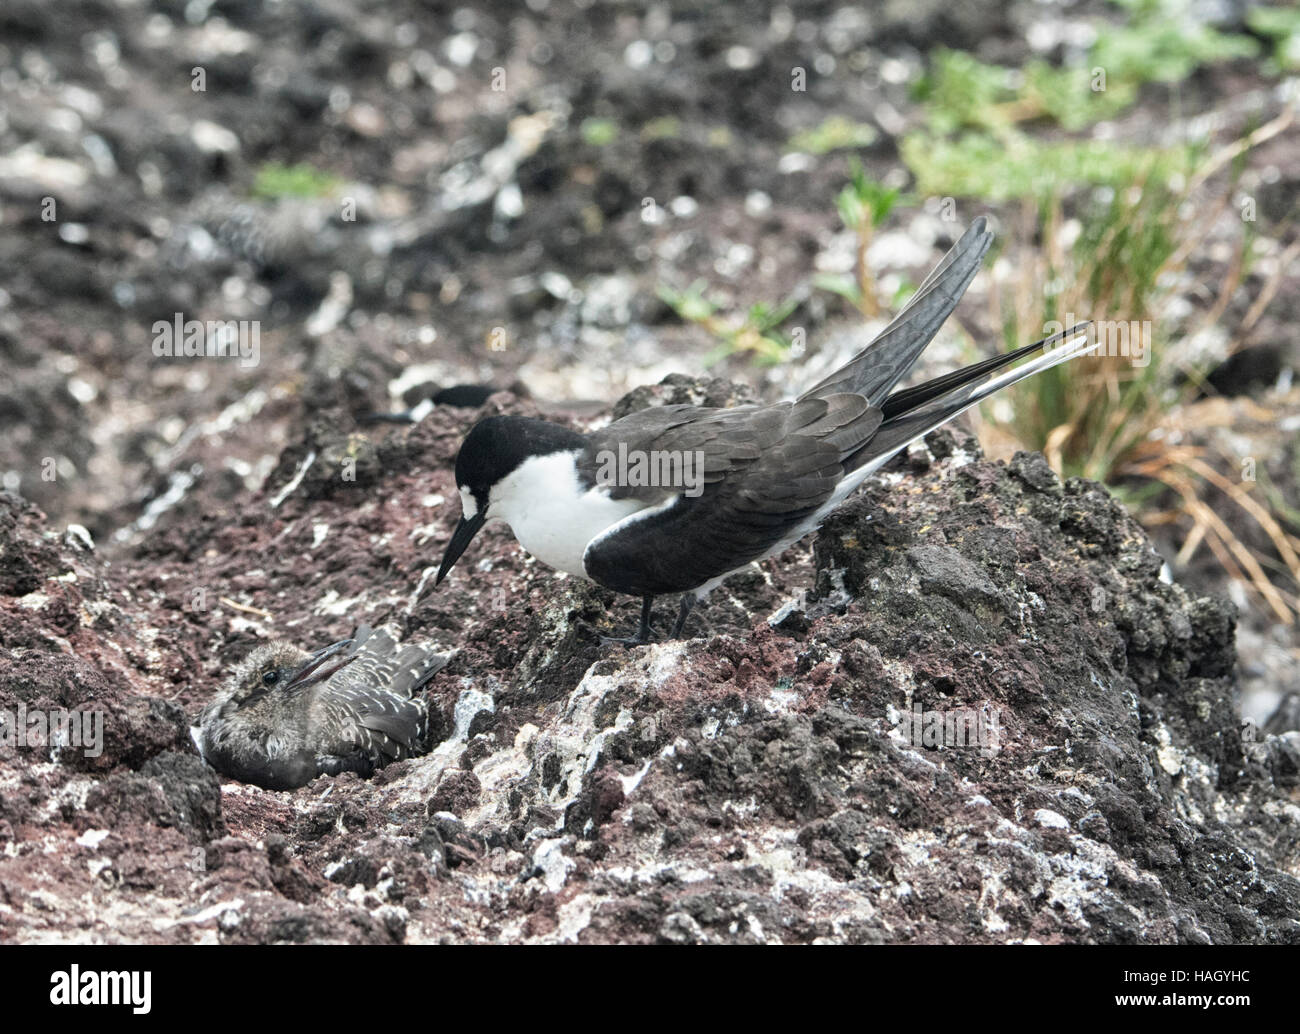 Parent and chick Sooty Tern (Sterna fuscata) camouflaged, Lord Howe Island, New South Wales, NSW, Australia Stock Photo